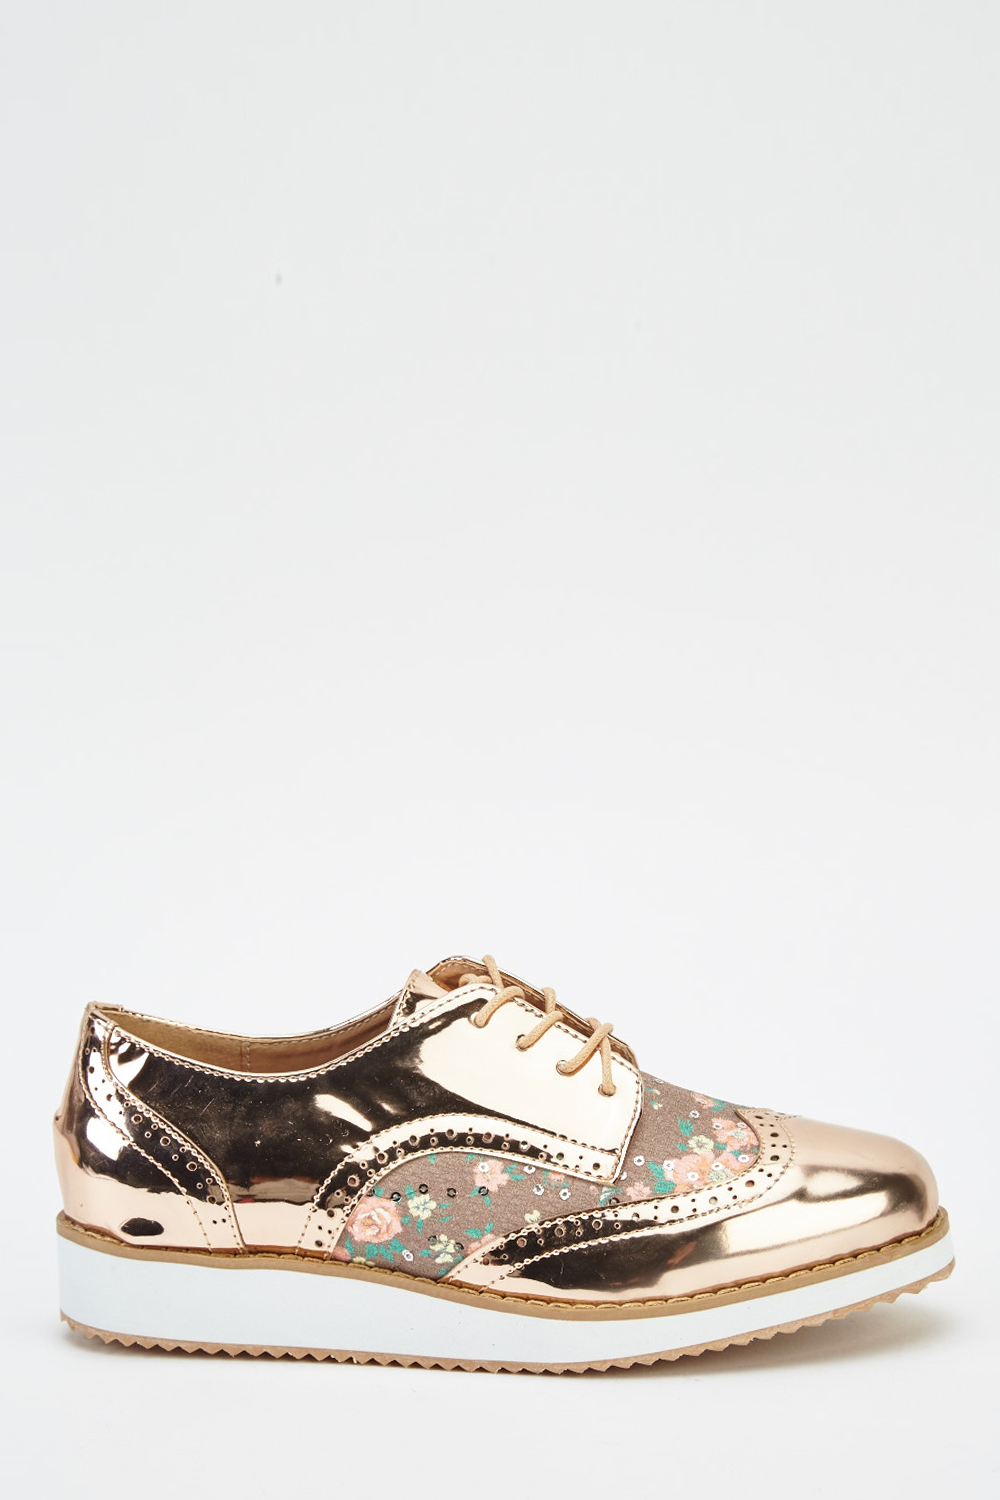 Floral Metallic Lace Up Shoes - Just $6